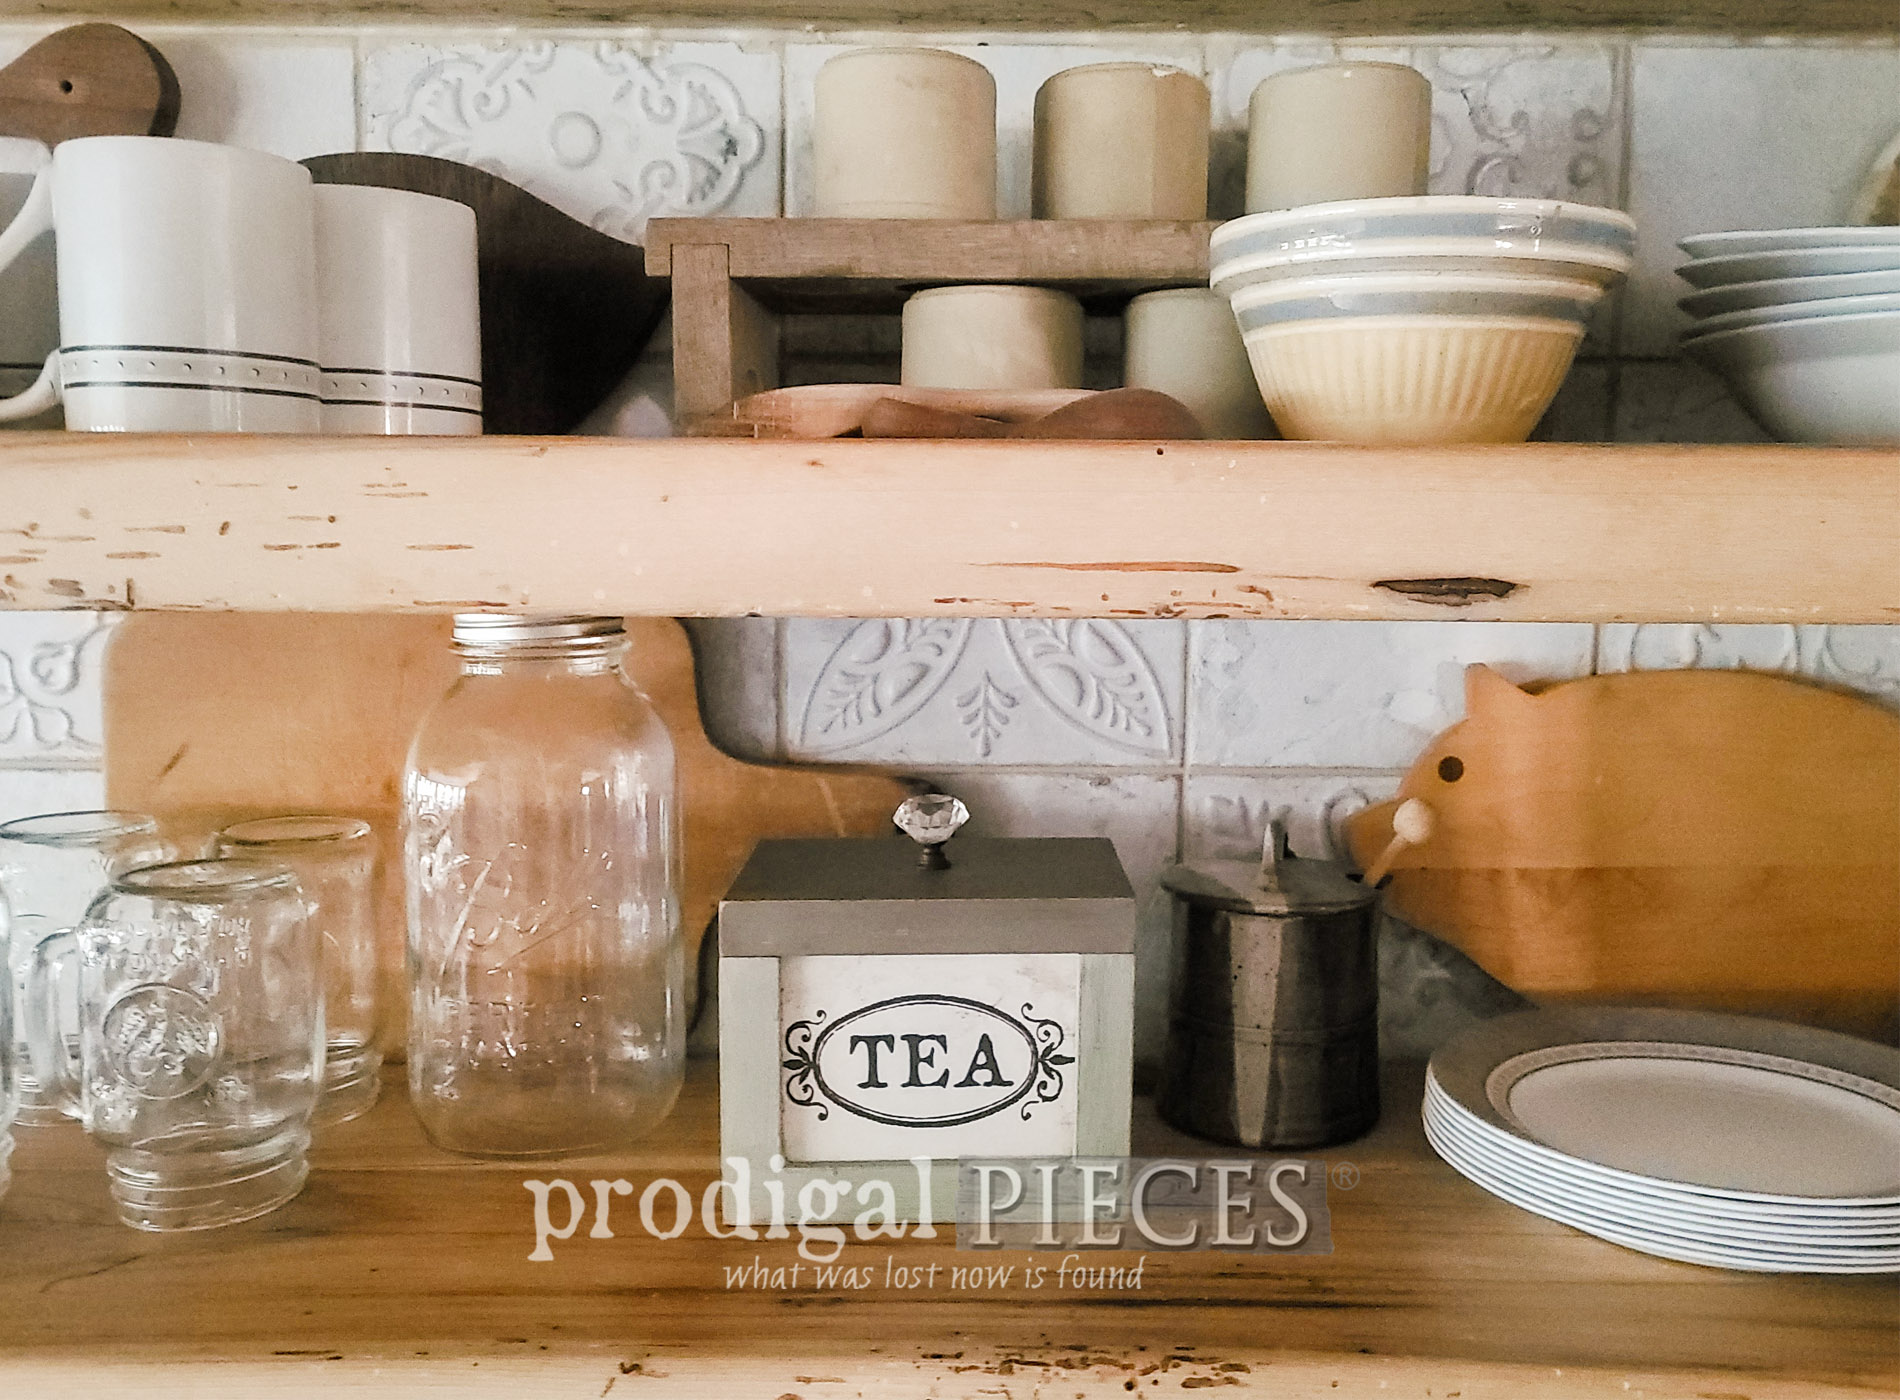 Featured Mini Thrift Store Makeovers by Larissa of Prodigal Pieces | prodigalpieces.com #prodigalpieces #diy #farmhouse #cottage #home #homedecor